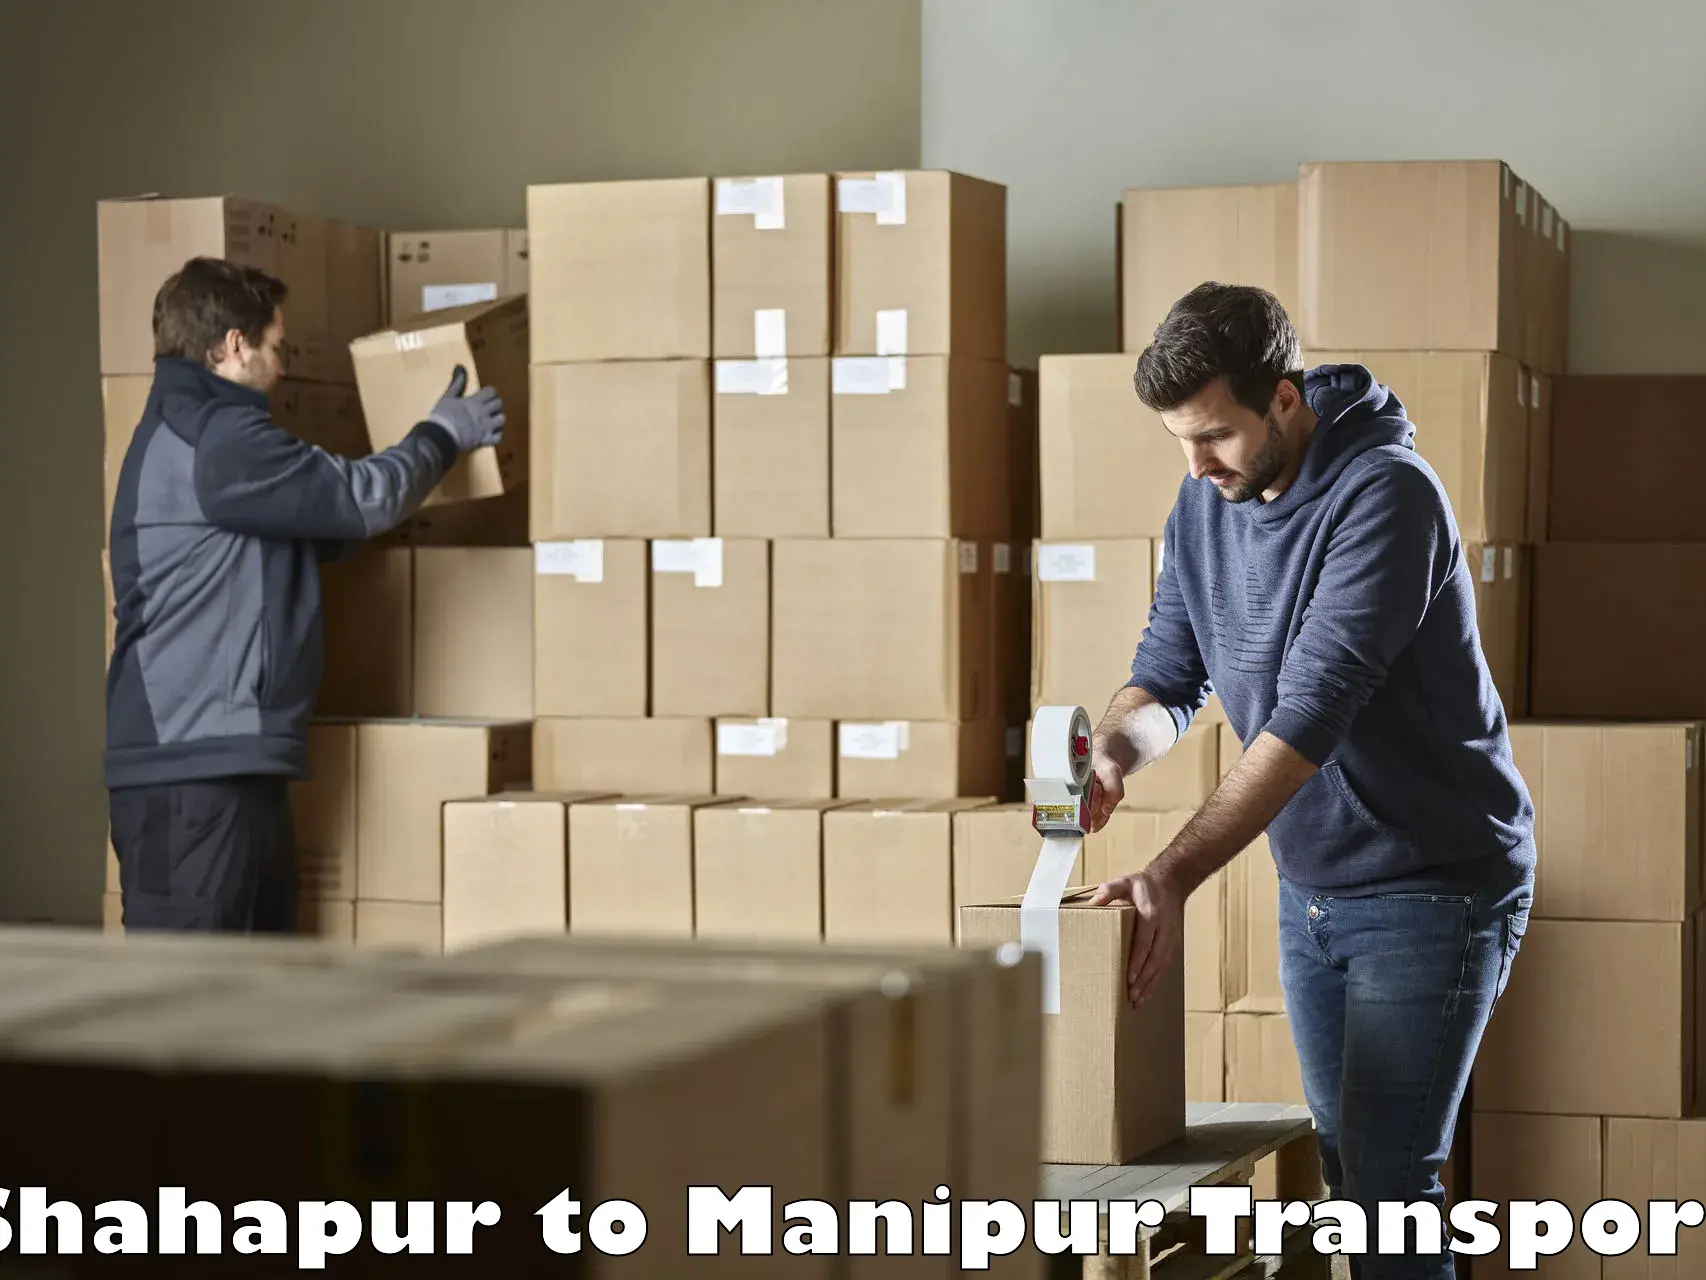 Pick up transport service in Shahapur to Manipur